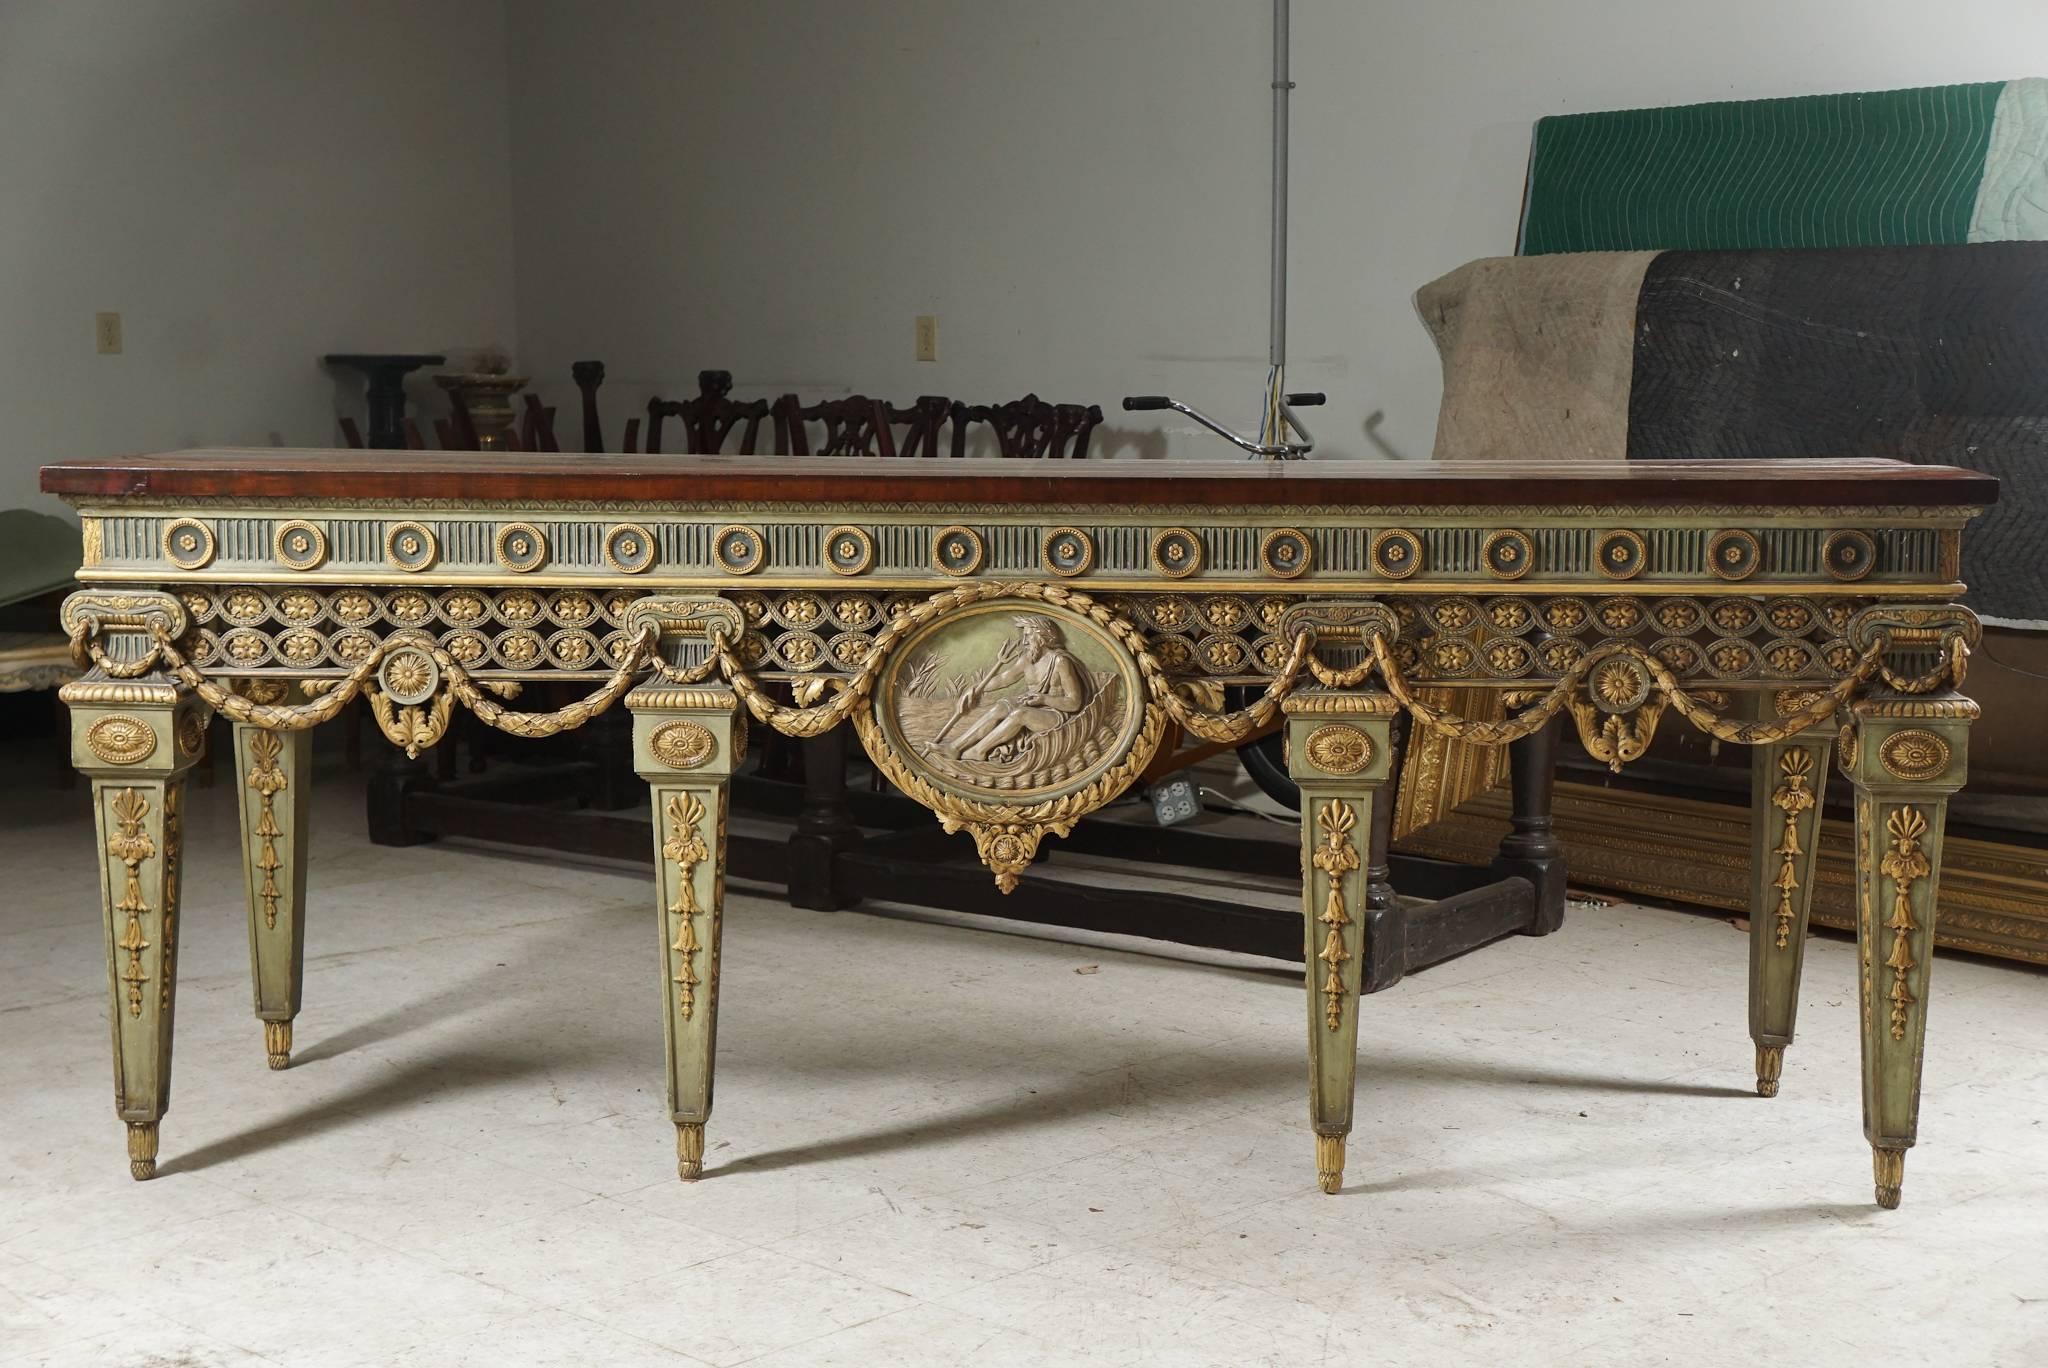 This very impressive console table comes from the famous American Country house Blairsden. This house built in Peapack NJ for C. Ledyard Blair and Mrs. Florence Blair between 1898 and 1903. The house was created and decorated by the important